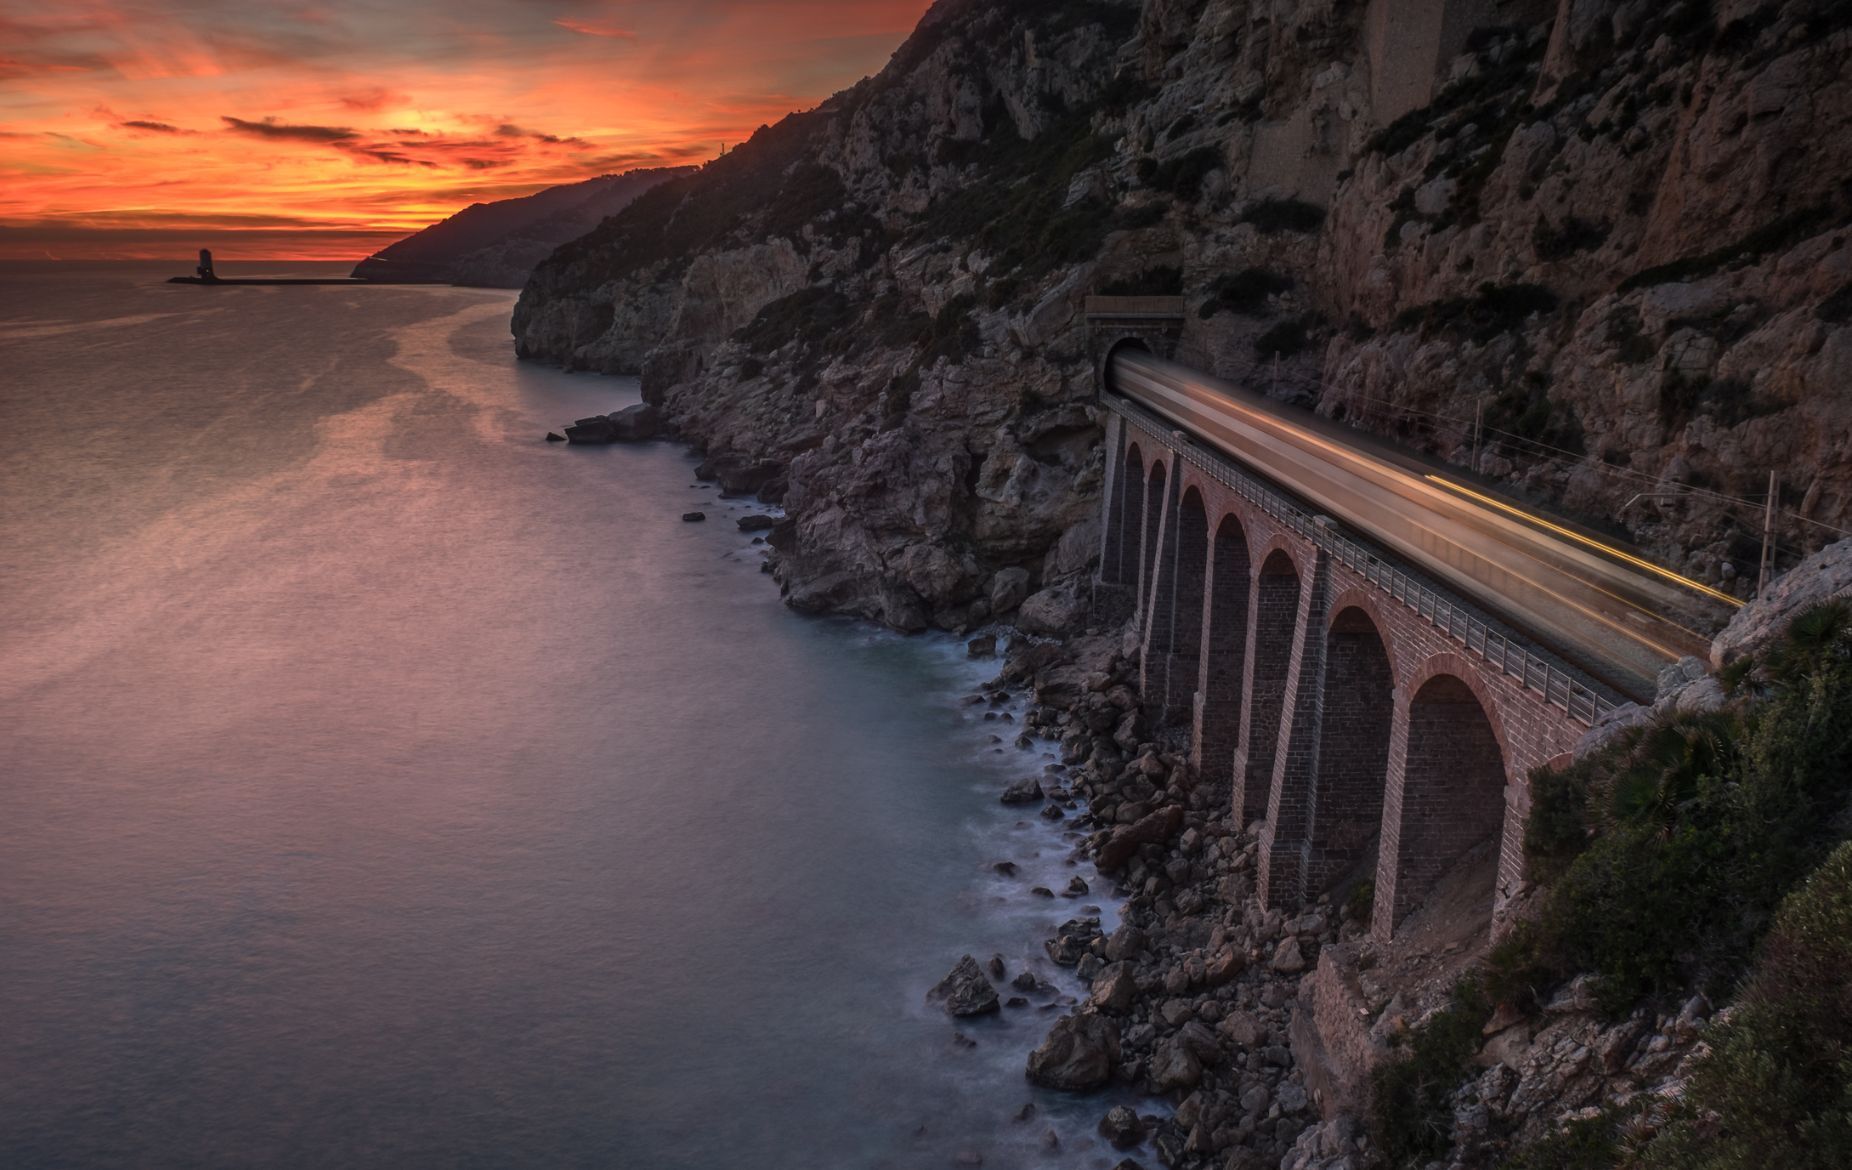 Sunset on the shores of the Garraf, of the province of Barcelona, with the sea, cliffs and the train passing through a bridge that runs along the coast between tunnels.